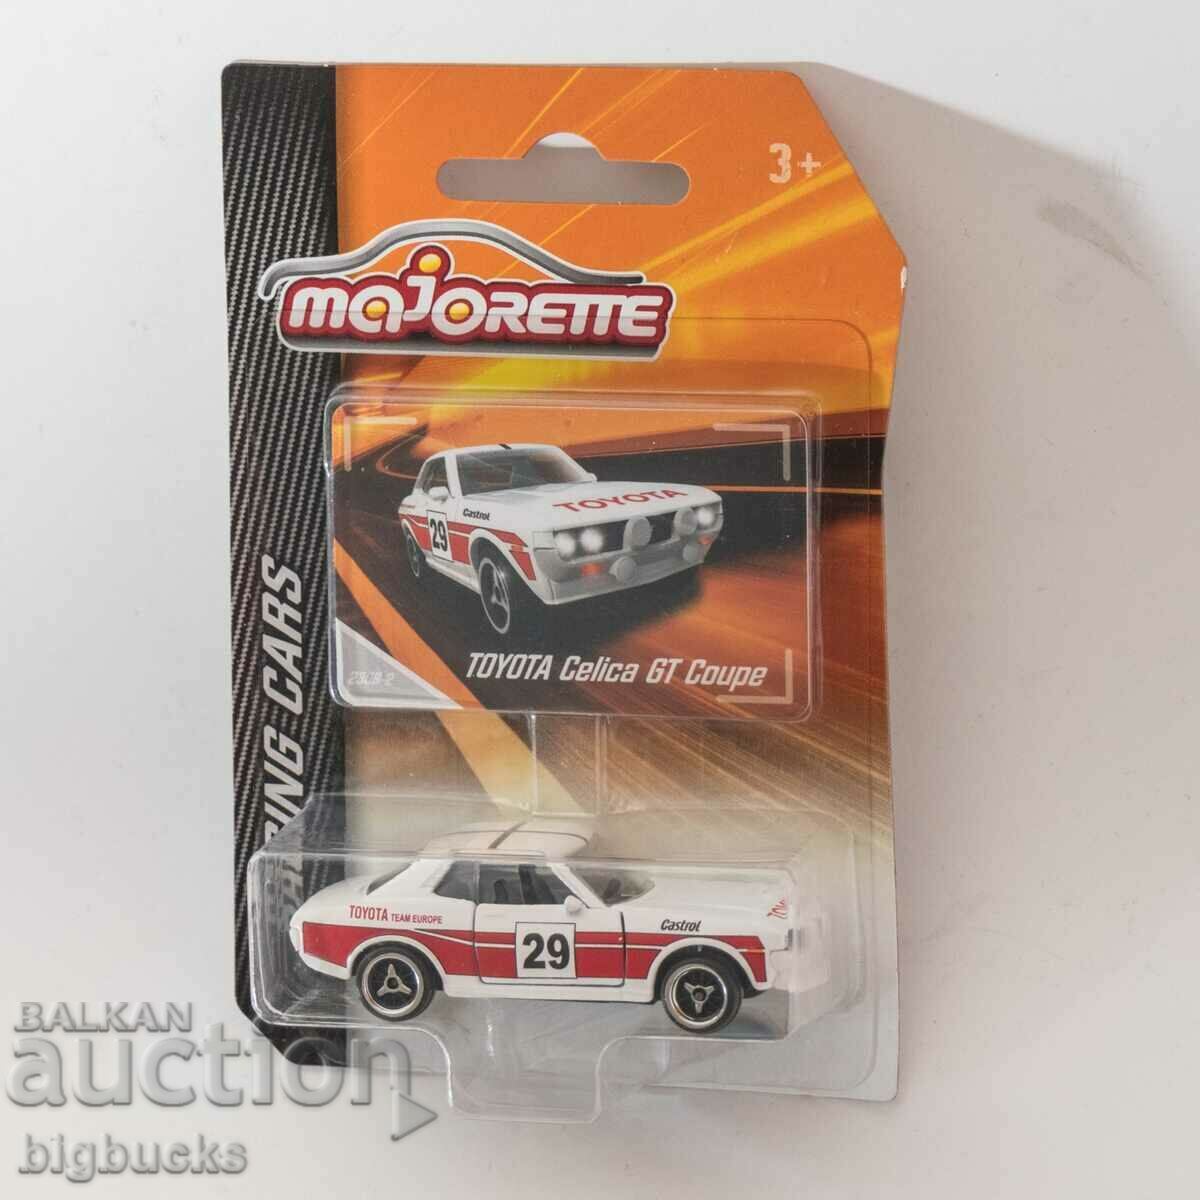 Majorette Racing Cars Toyota Celica GT Coupe scale model 1:64